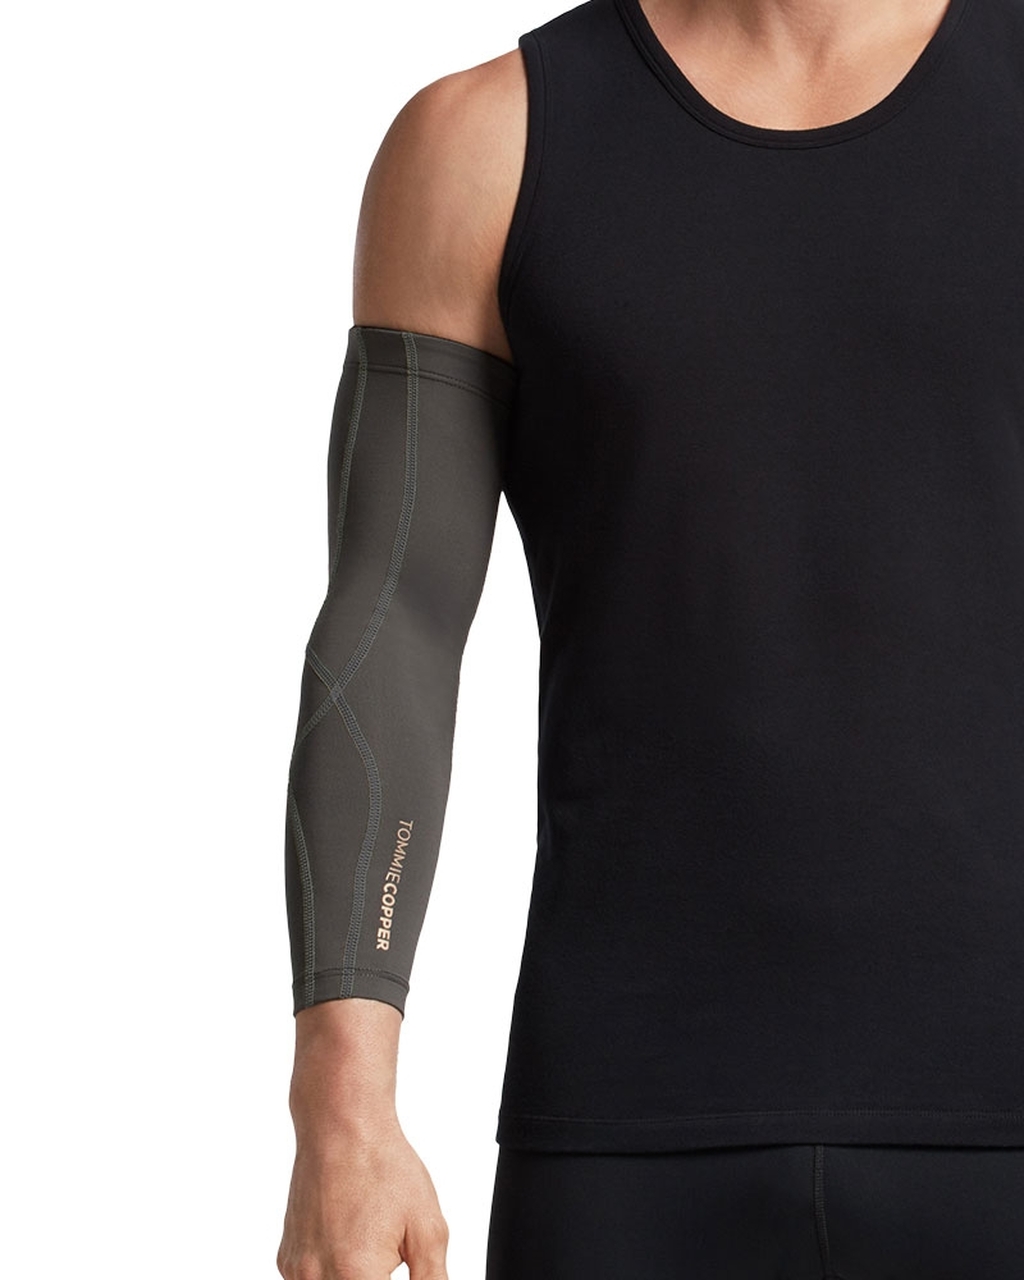 Arm Sleeves for Men, Tommie Copper®